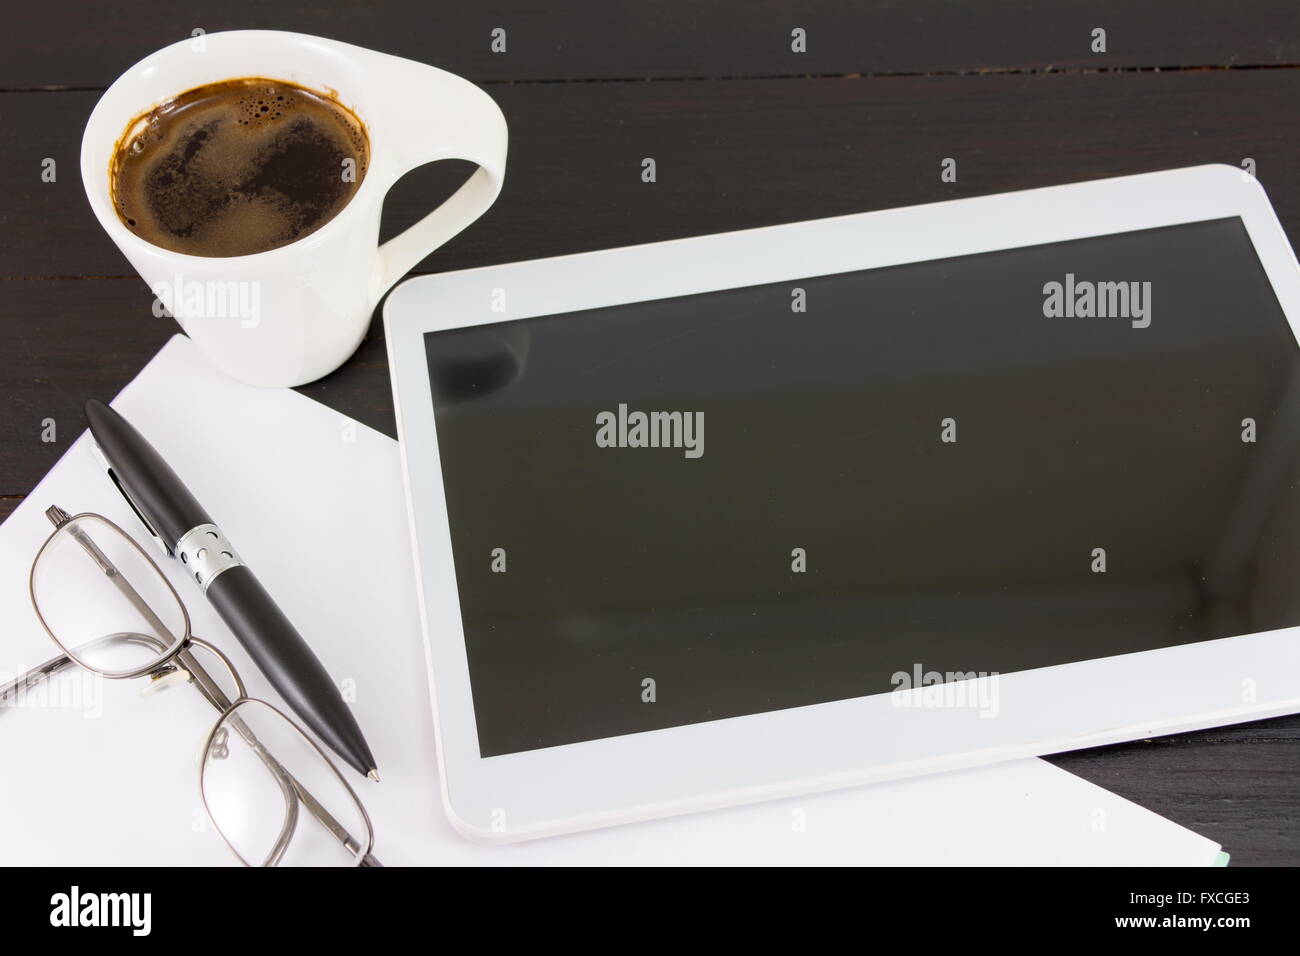 Cup of coffee for a good working day. Coffee and tech accessories on black table Stock Photo